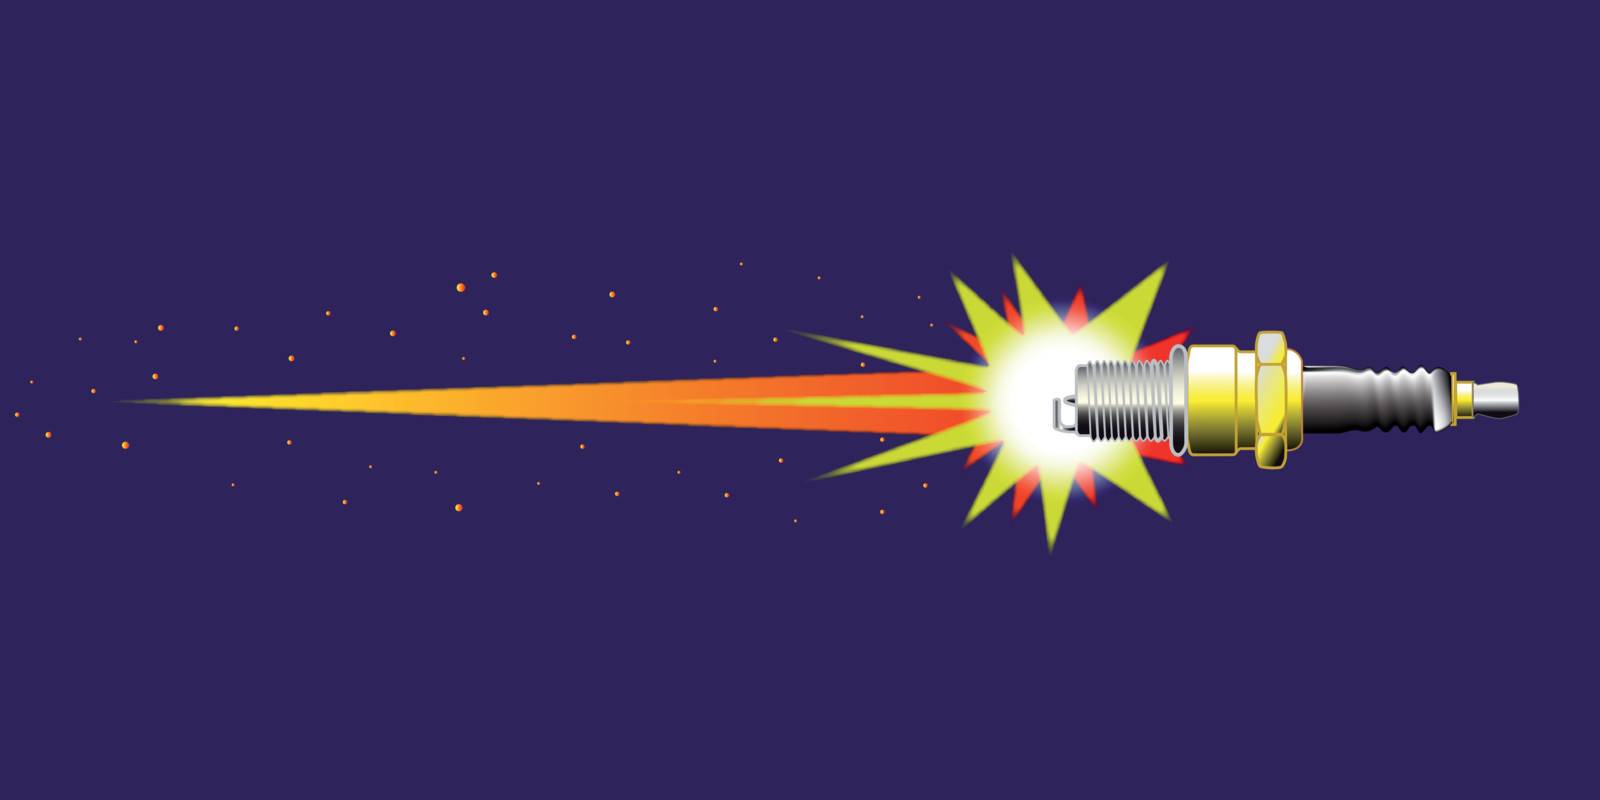 A spark plug emulating a space ship in outer space.